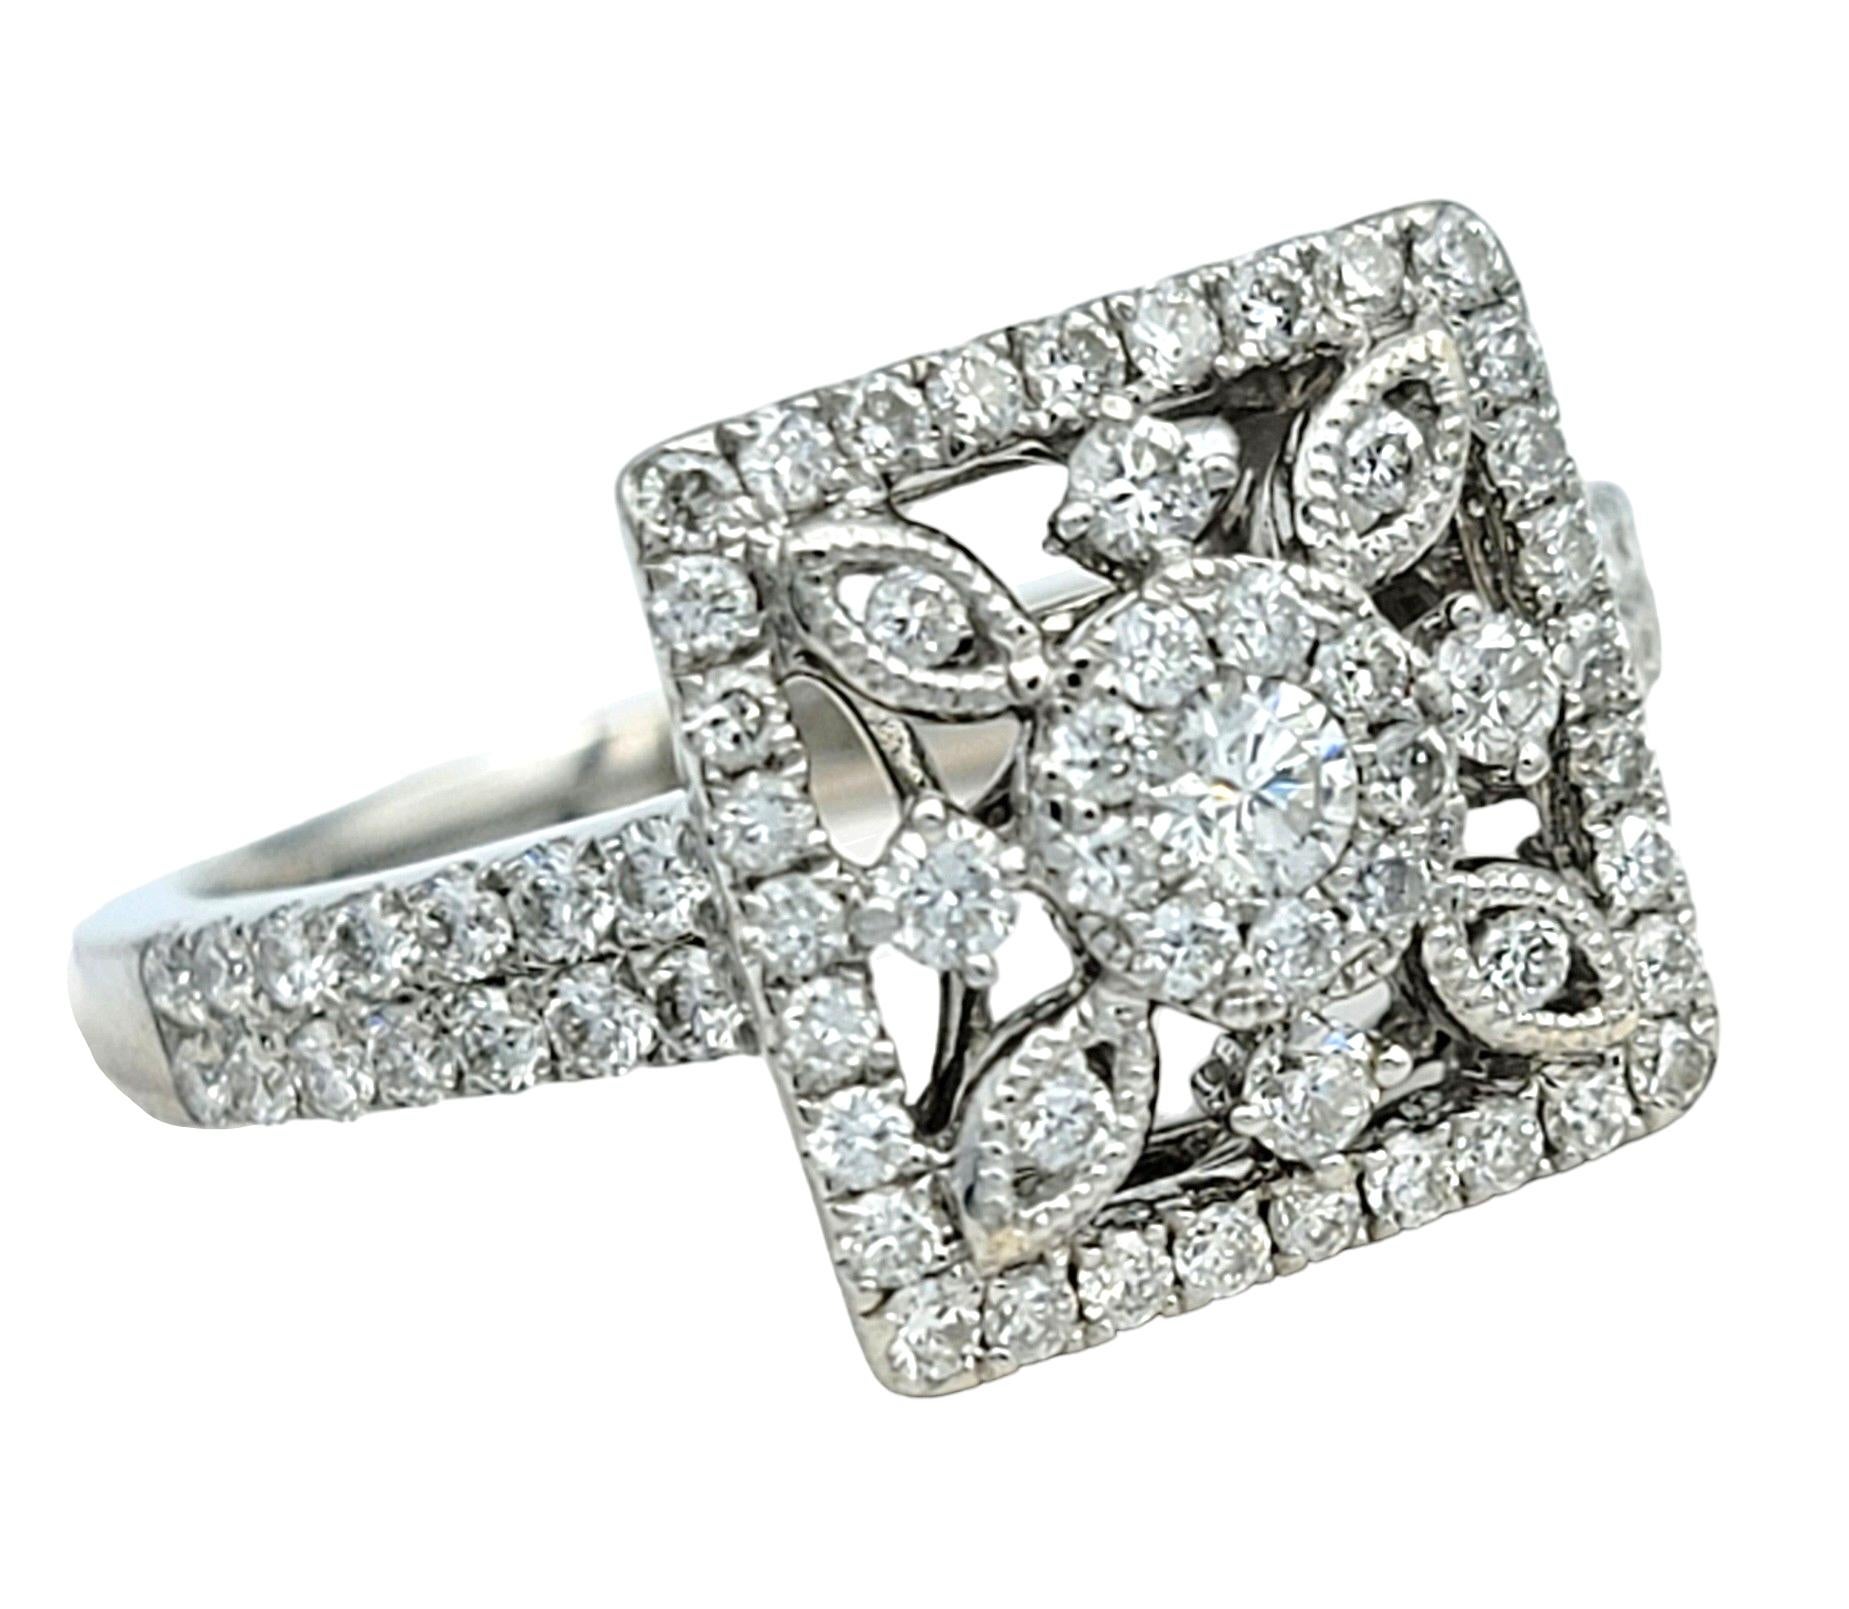 Ring Size: 6.5

This diamond cocktail ring is a captivating piece set in 18 karat white gold. Its centerpiece features a unique square cut-out design, adding an element of intrigue and modernity to the ring. Encrusted with dazzling diamonds along